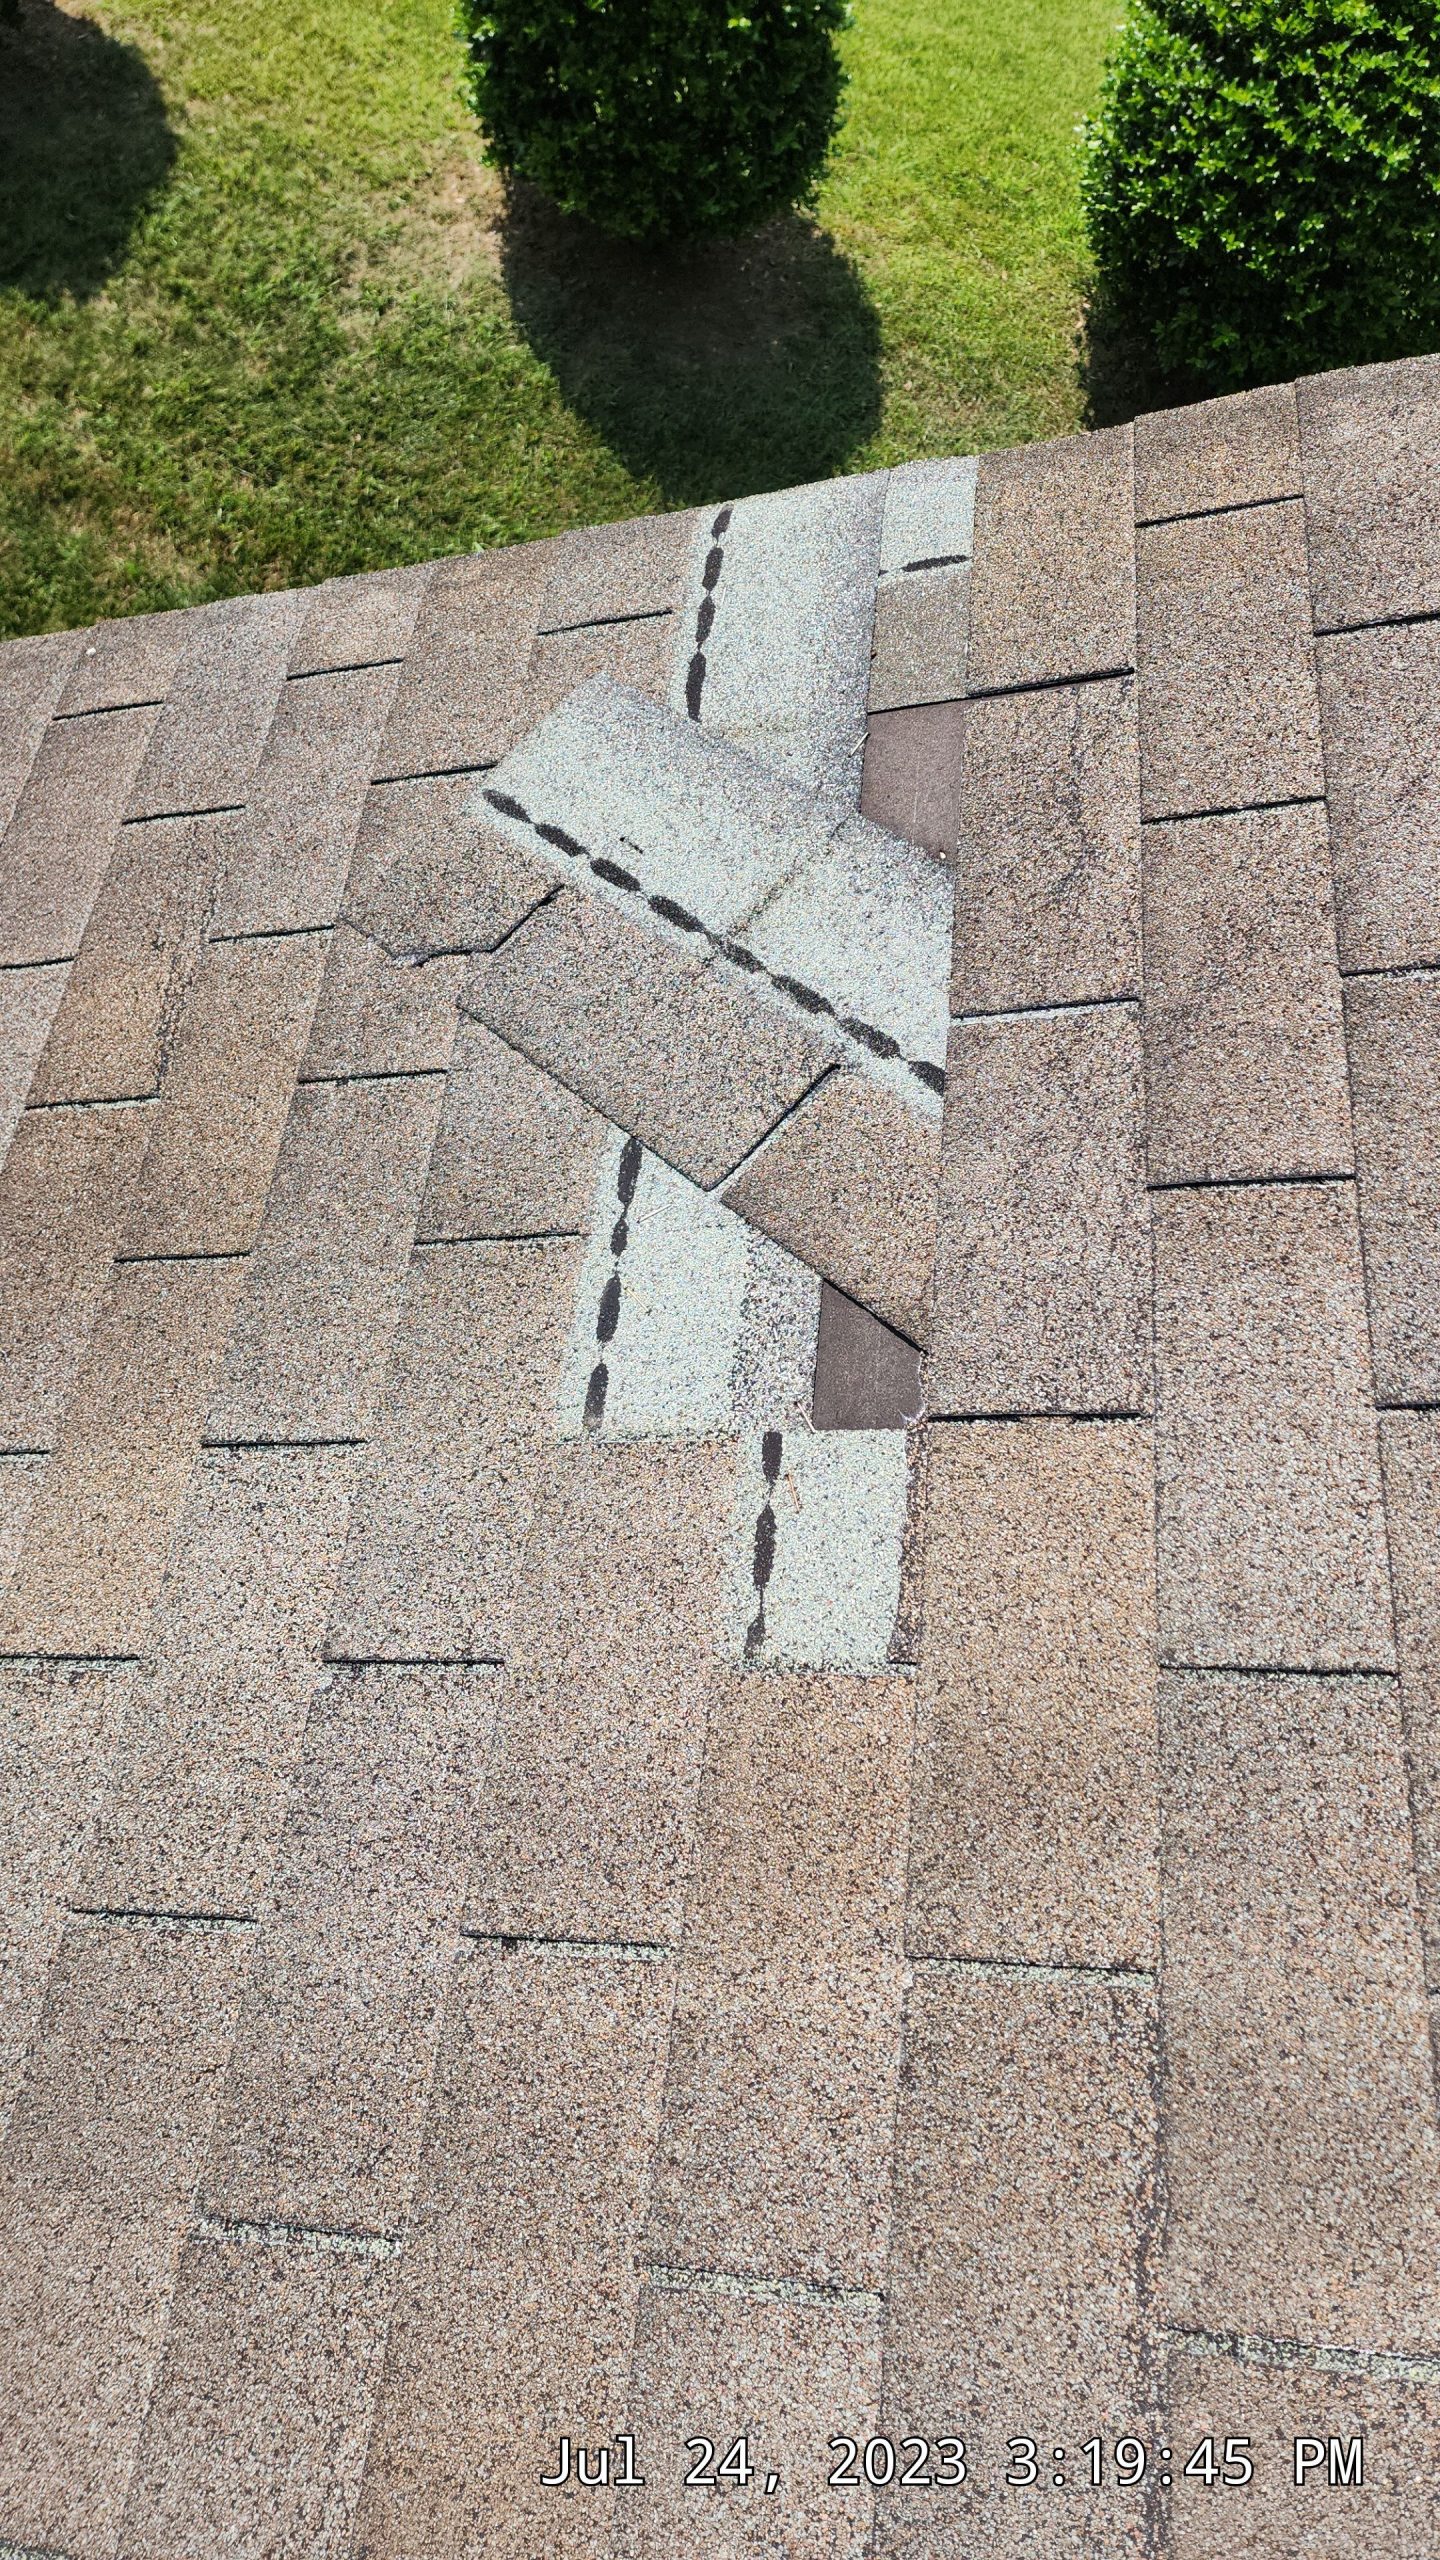 Detached and missing shingles